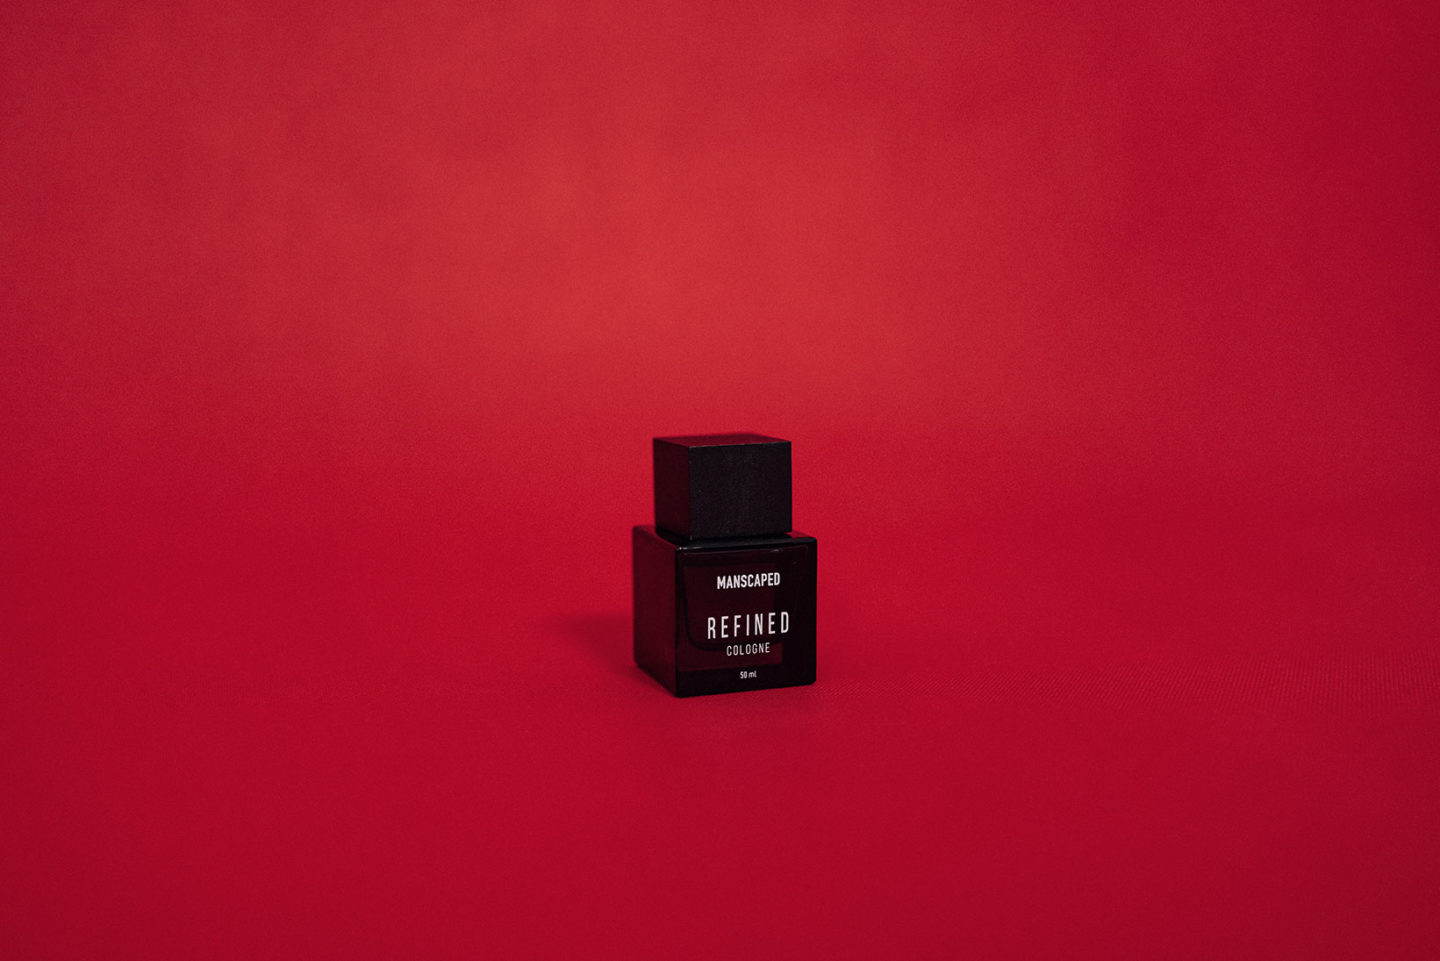 Manscaped Refined Cologne Duft.